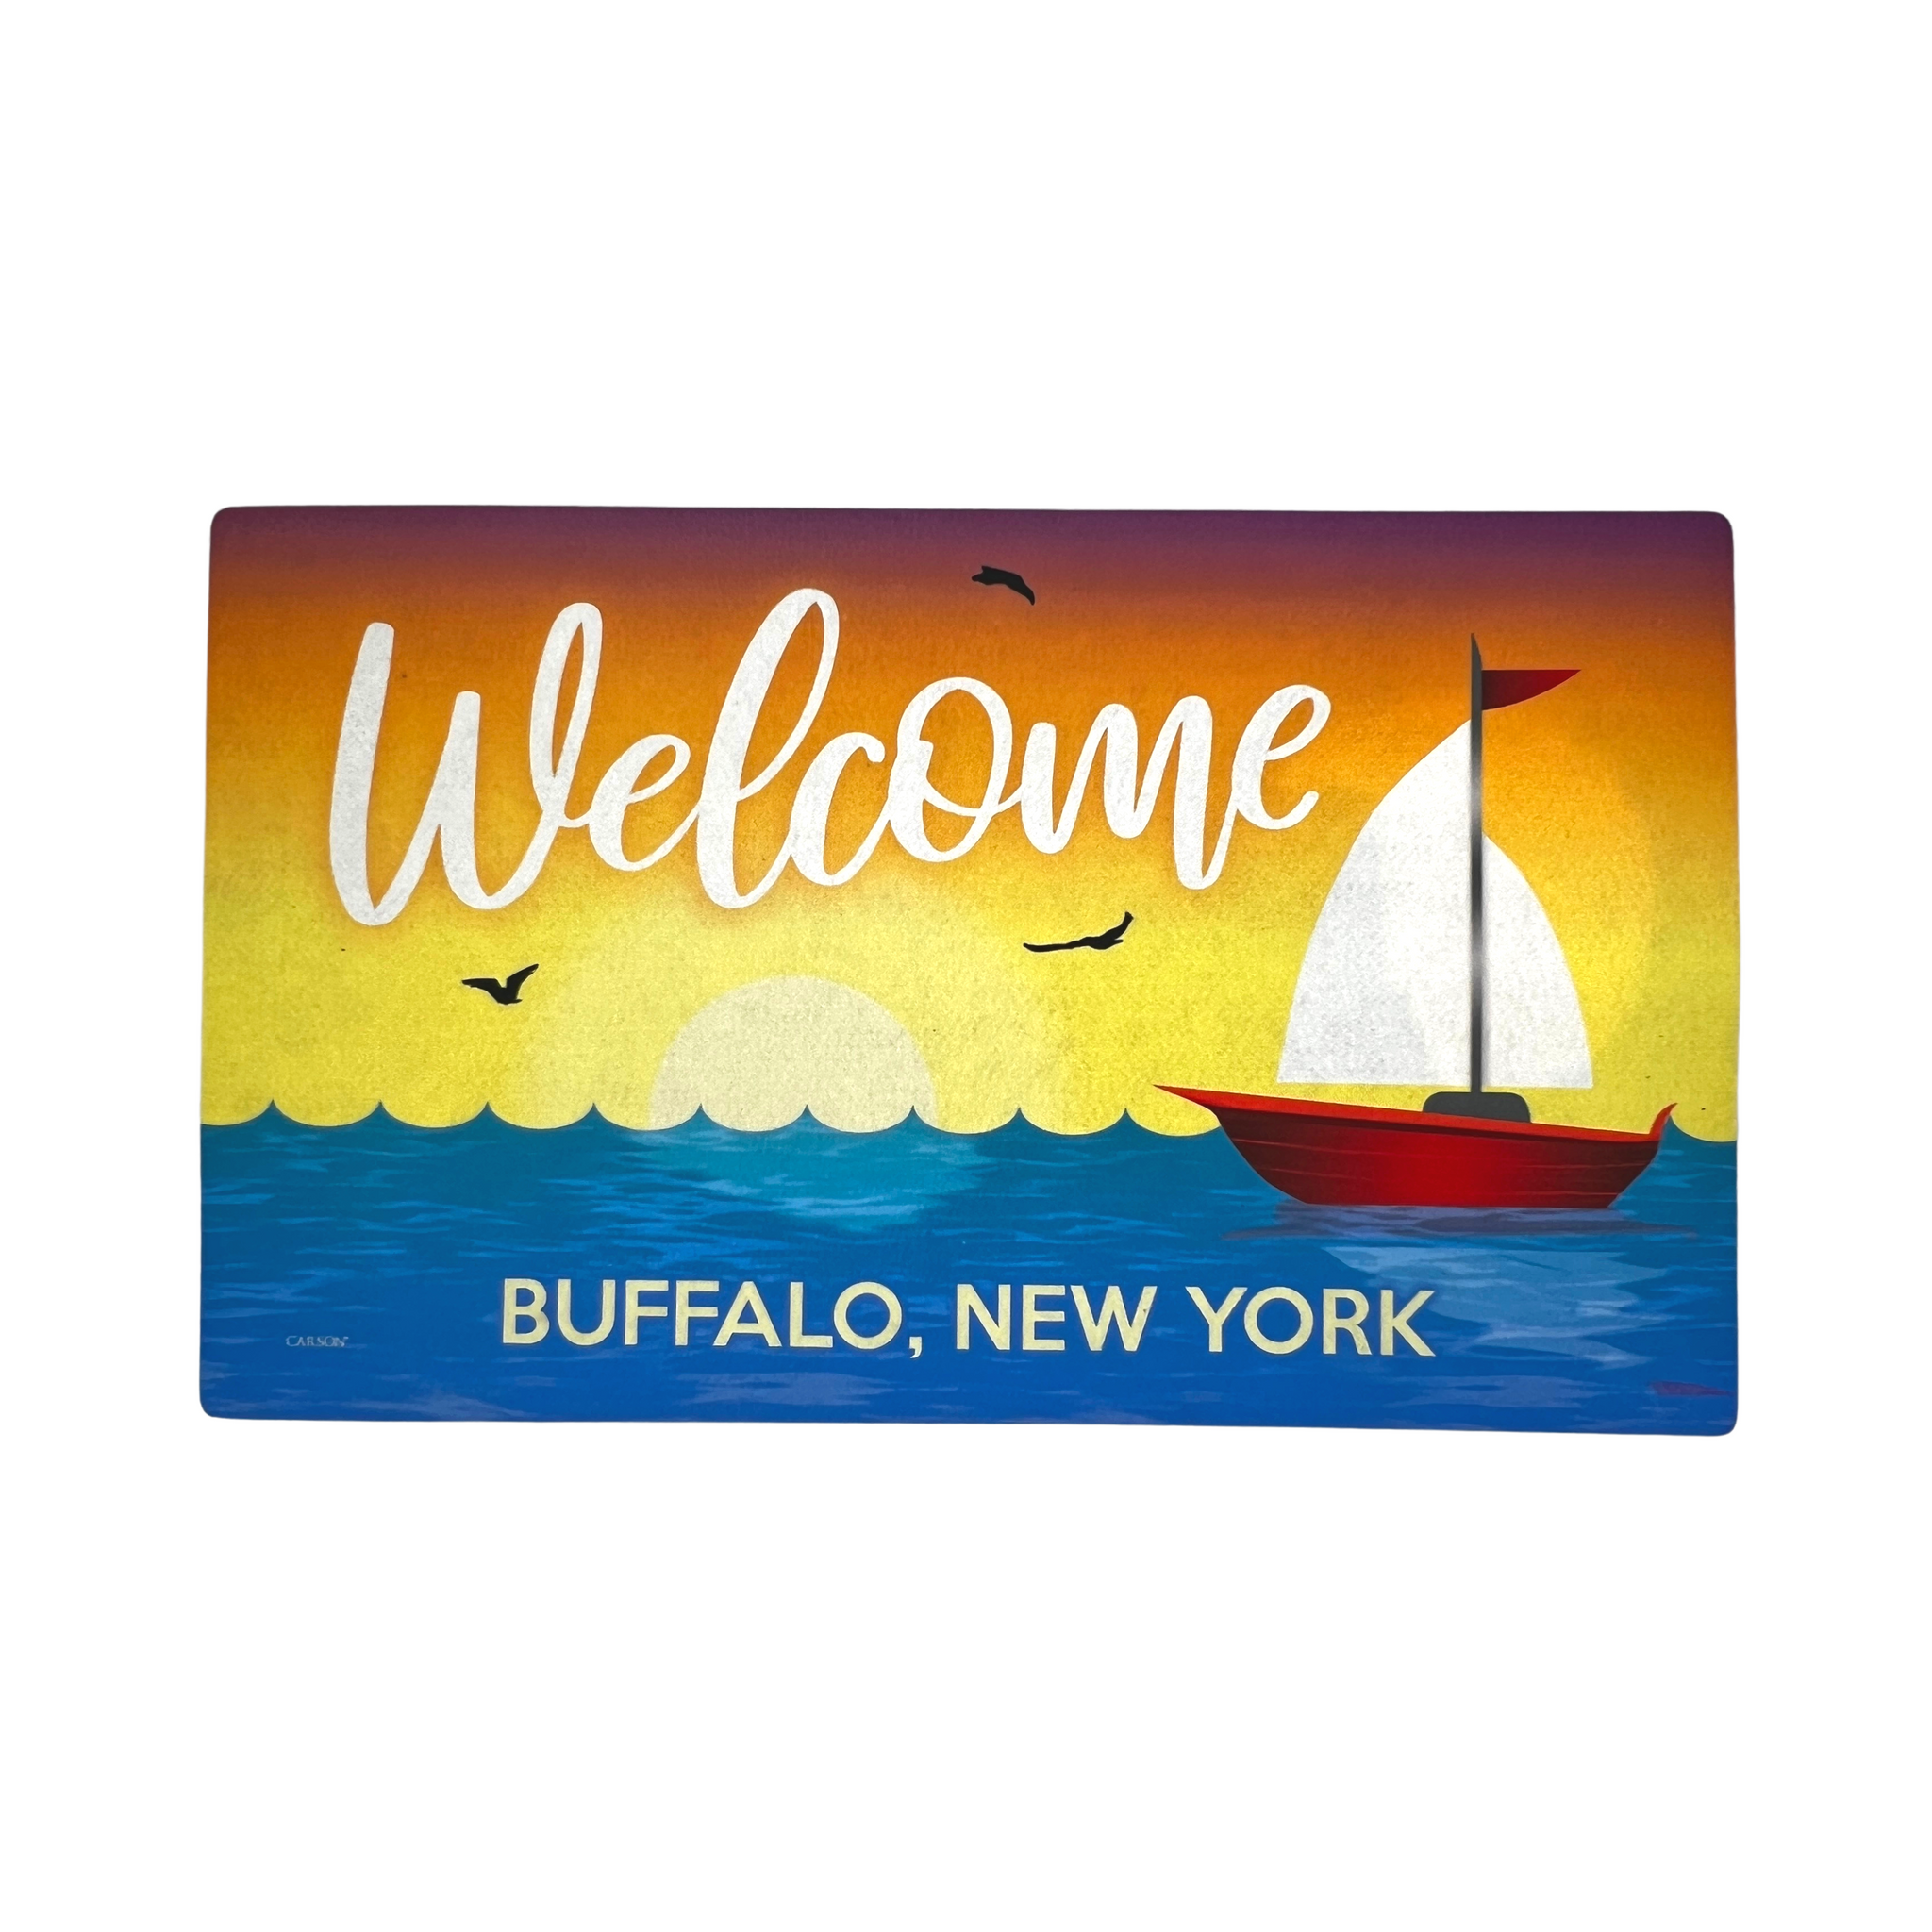 bflo store buffalo new york welcome door mat with lake sunset and sail boat